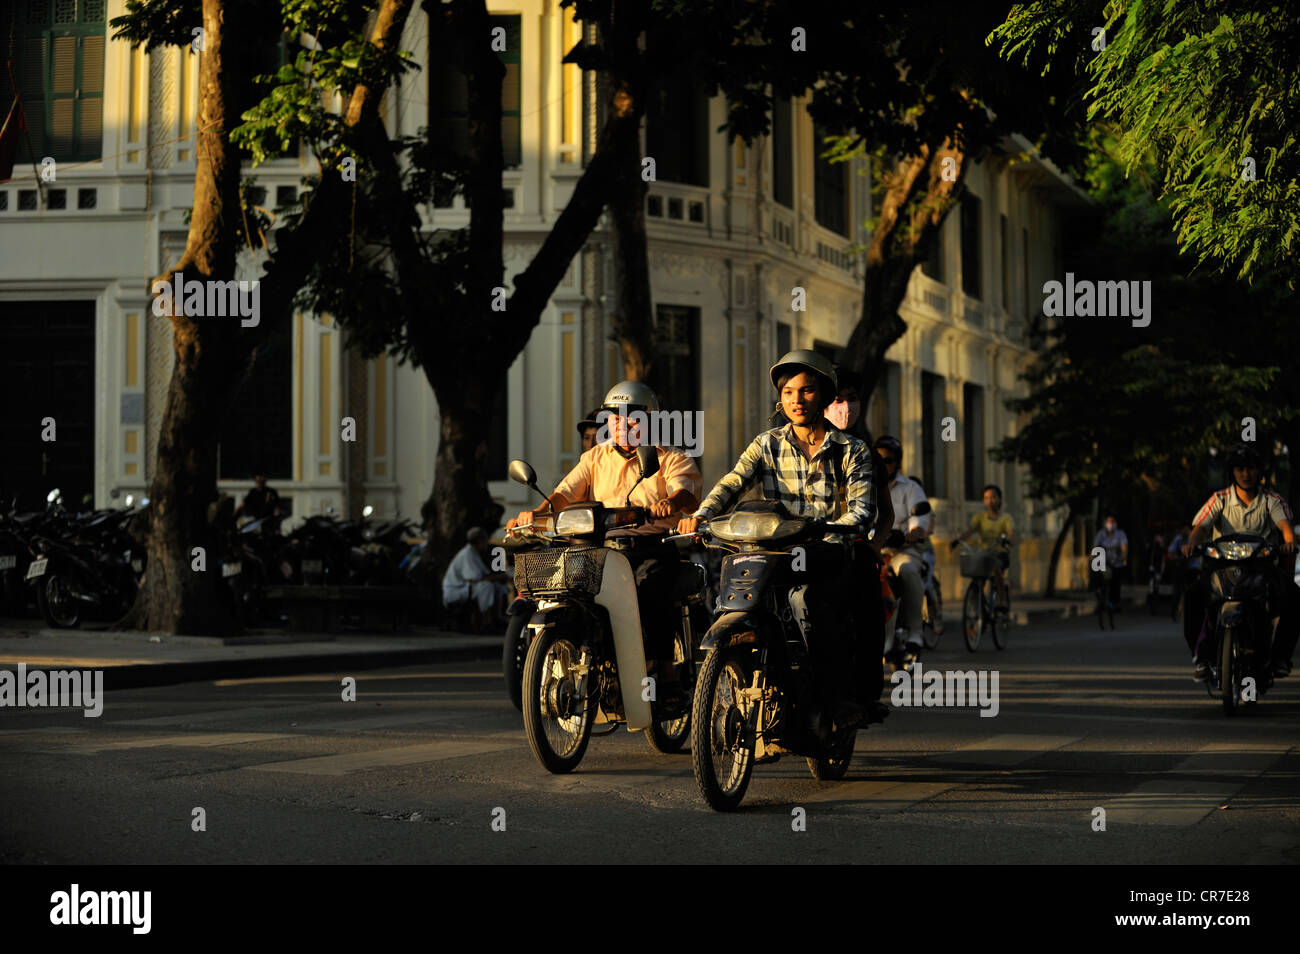 Vietnam, Hanoi, old town, traffic around Hoan Kiem Lake (also called the small lake or Lake of the Restored Sword) Stock Photo